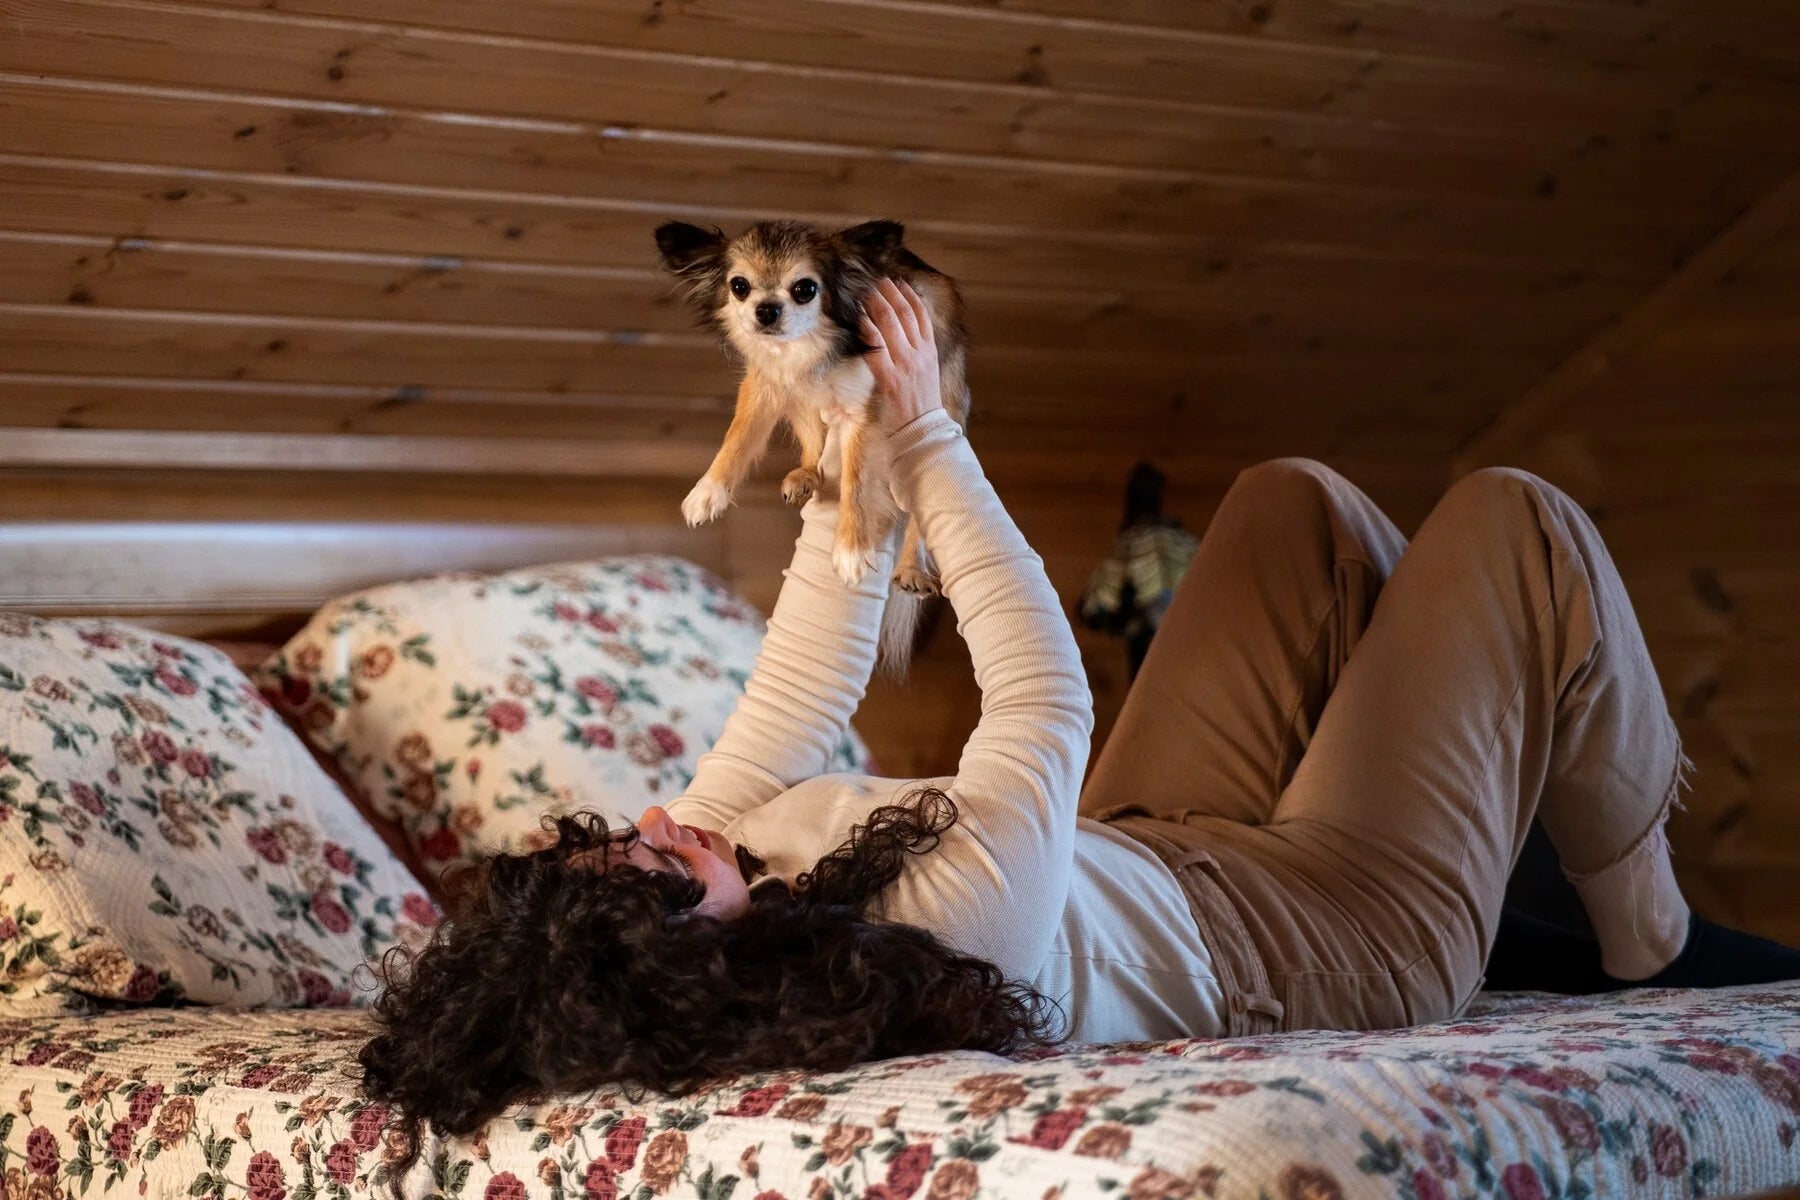 CREATING A PET-FRIENDLY HOME: TIPS FOR A HAPPY COEXISTENCE